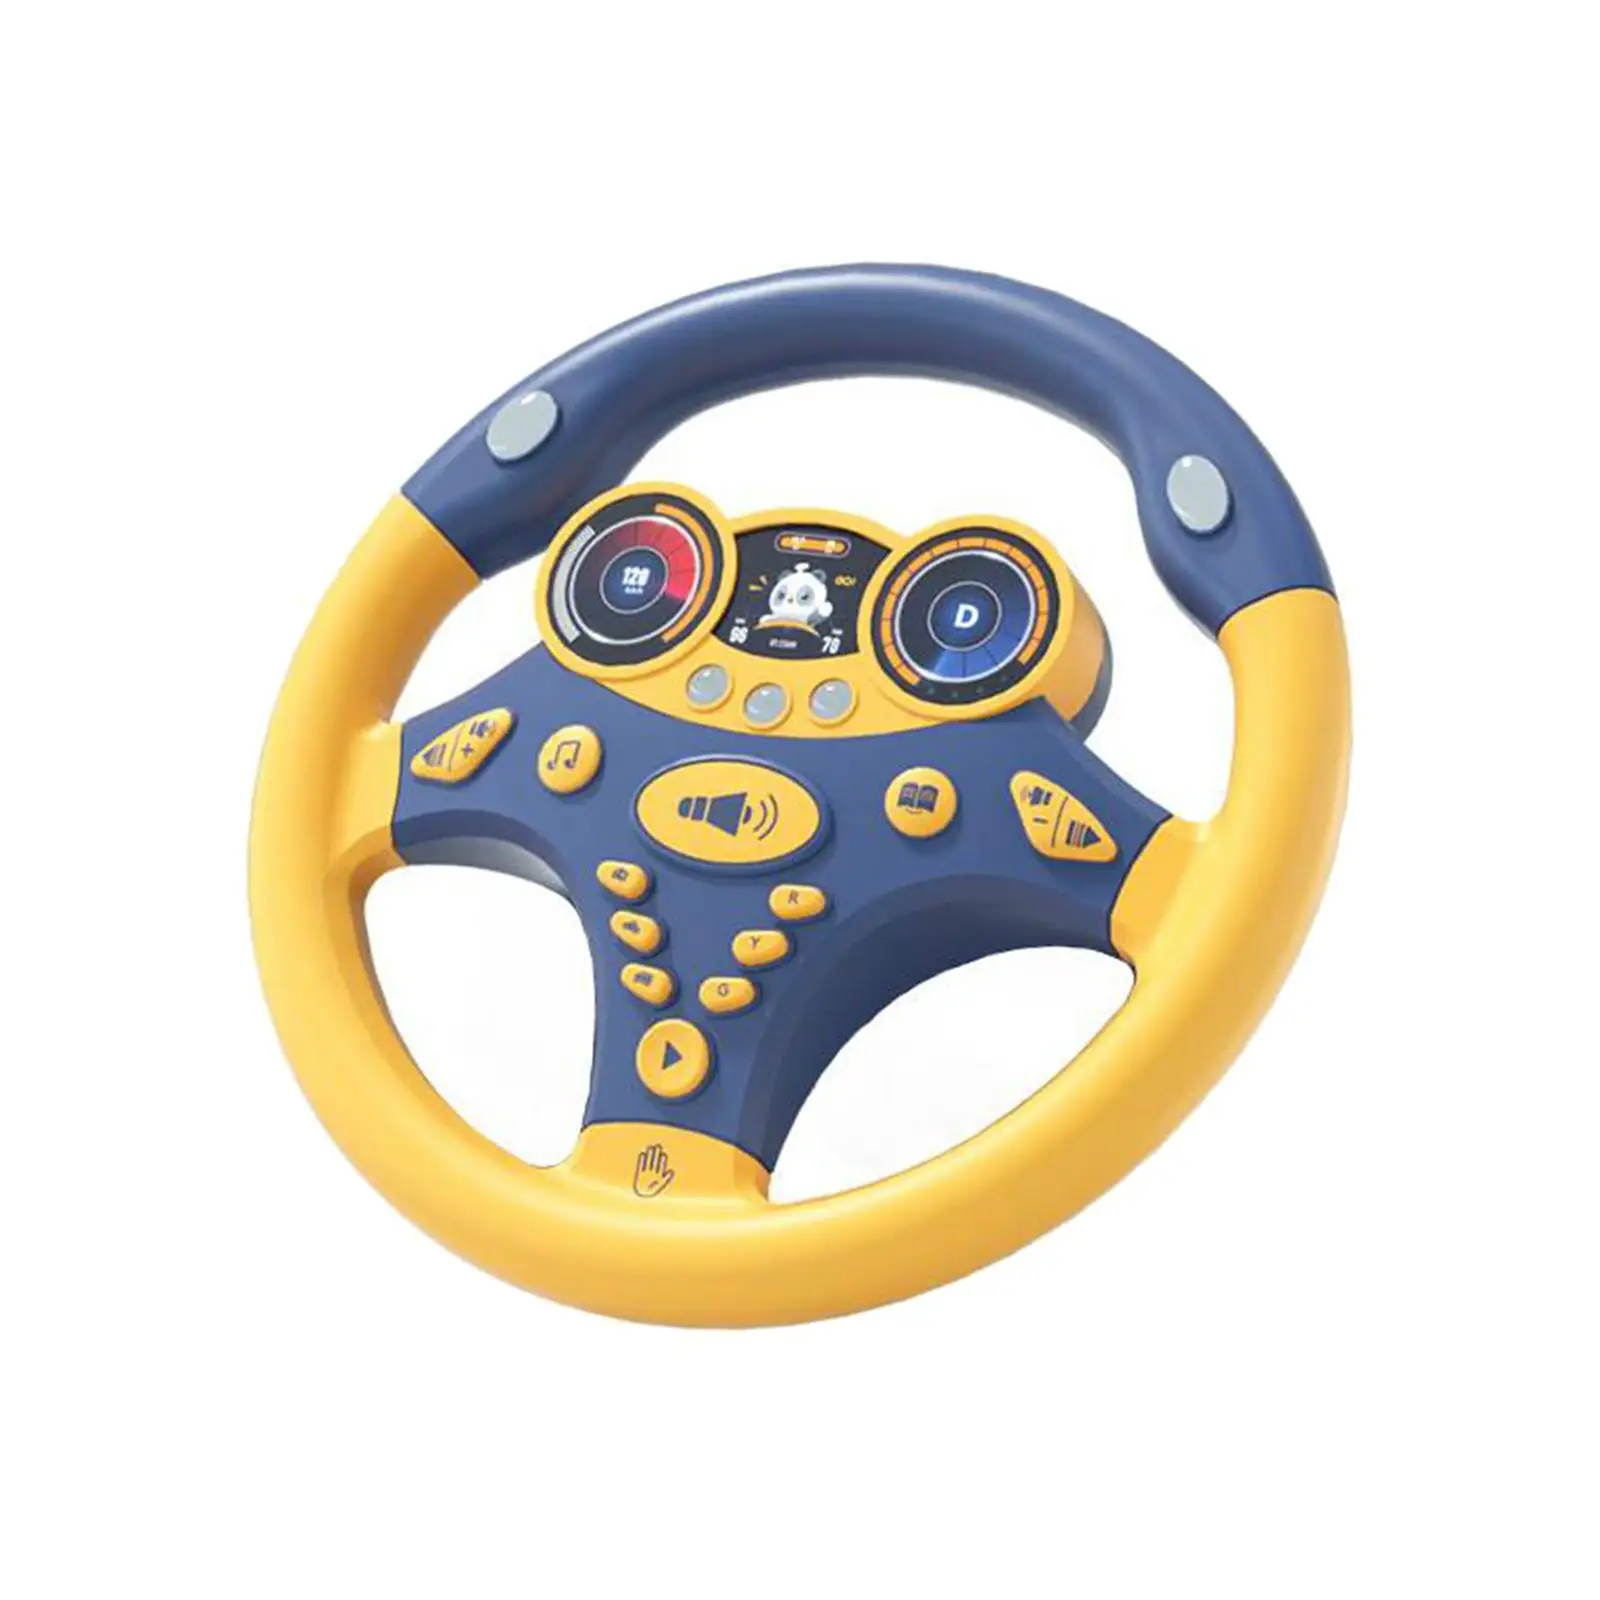 Round Electric Steering Wheel Toy Simulated Driving Steering Wheel Kids Electric Wheel Toy for Boys Children Kids Holiday Gifts